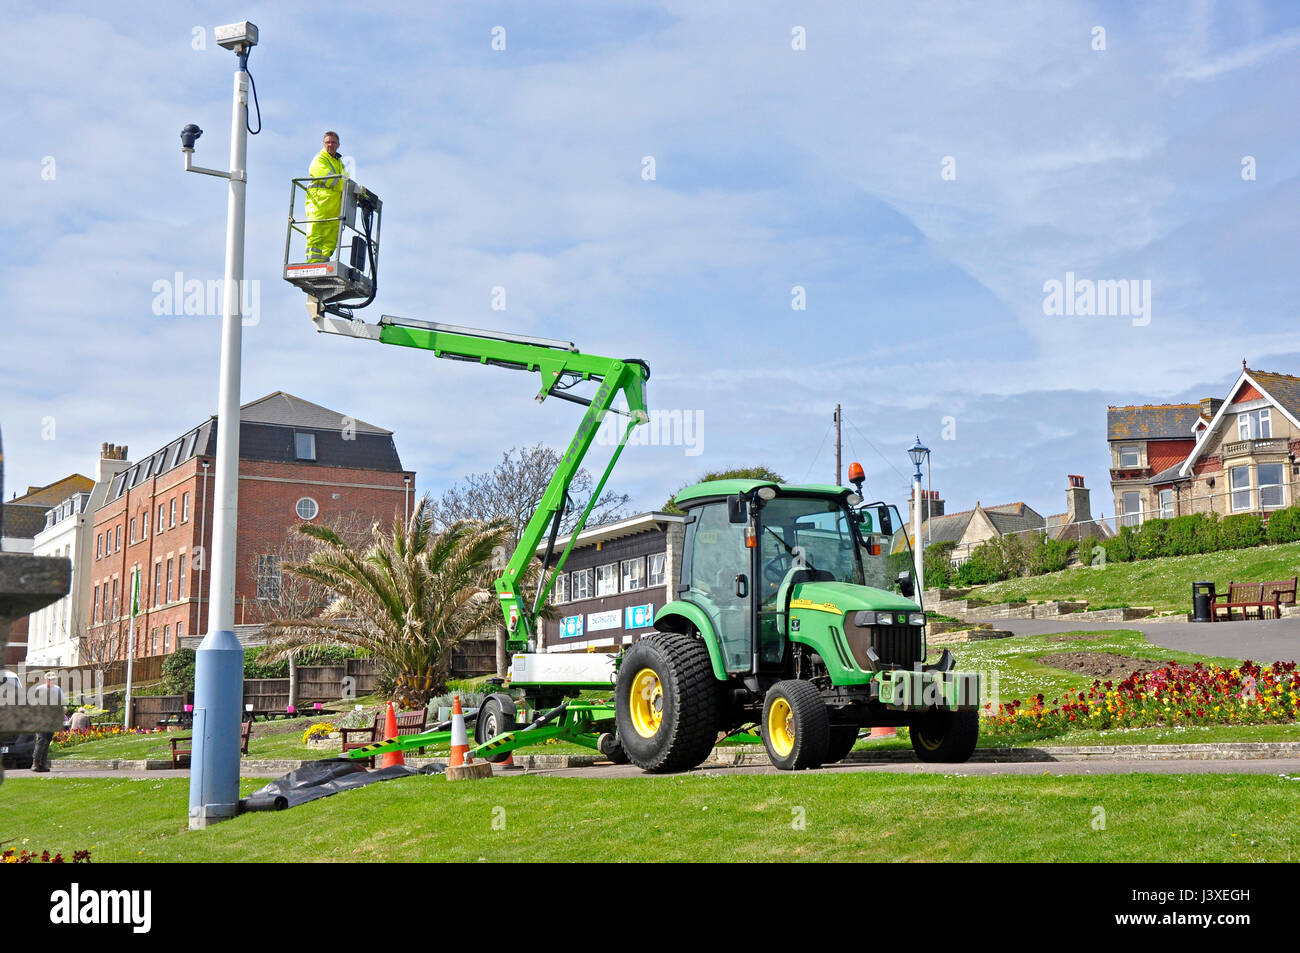 Workman inspecting high level CCTV  using articulated tub lift mounted on tractor + trailer - seafront pleasure gardens - ready for the tourist season Stock Photo